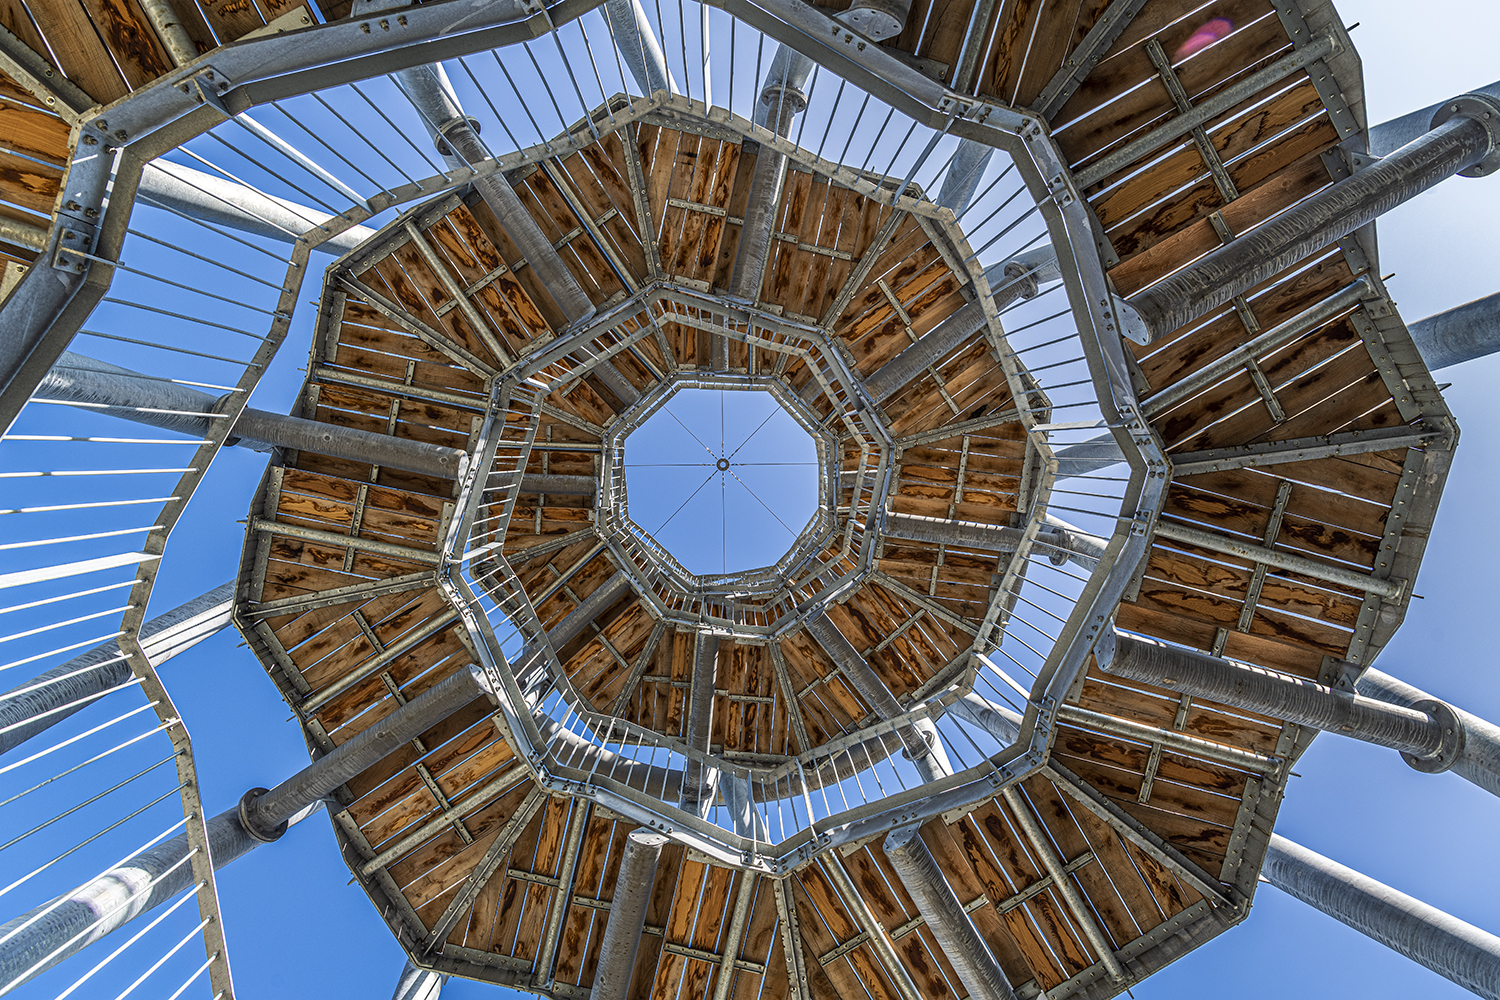 Spiral staircase view from below (Tilburg, The Netherlands)